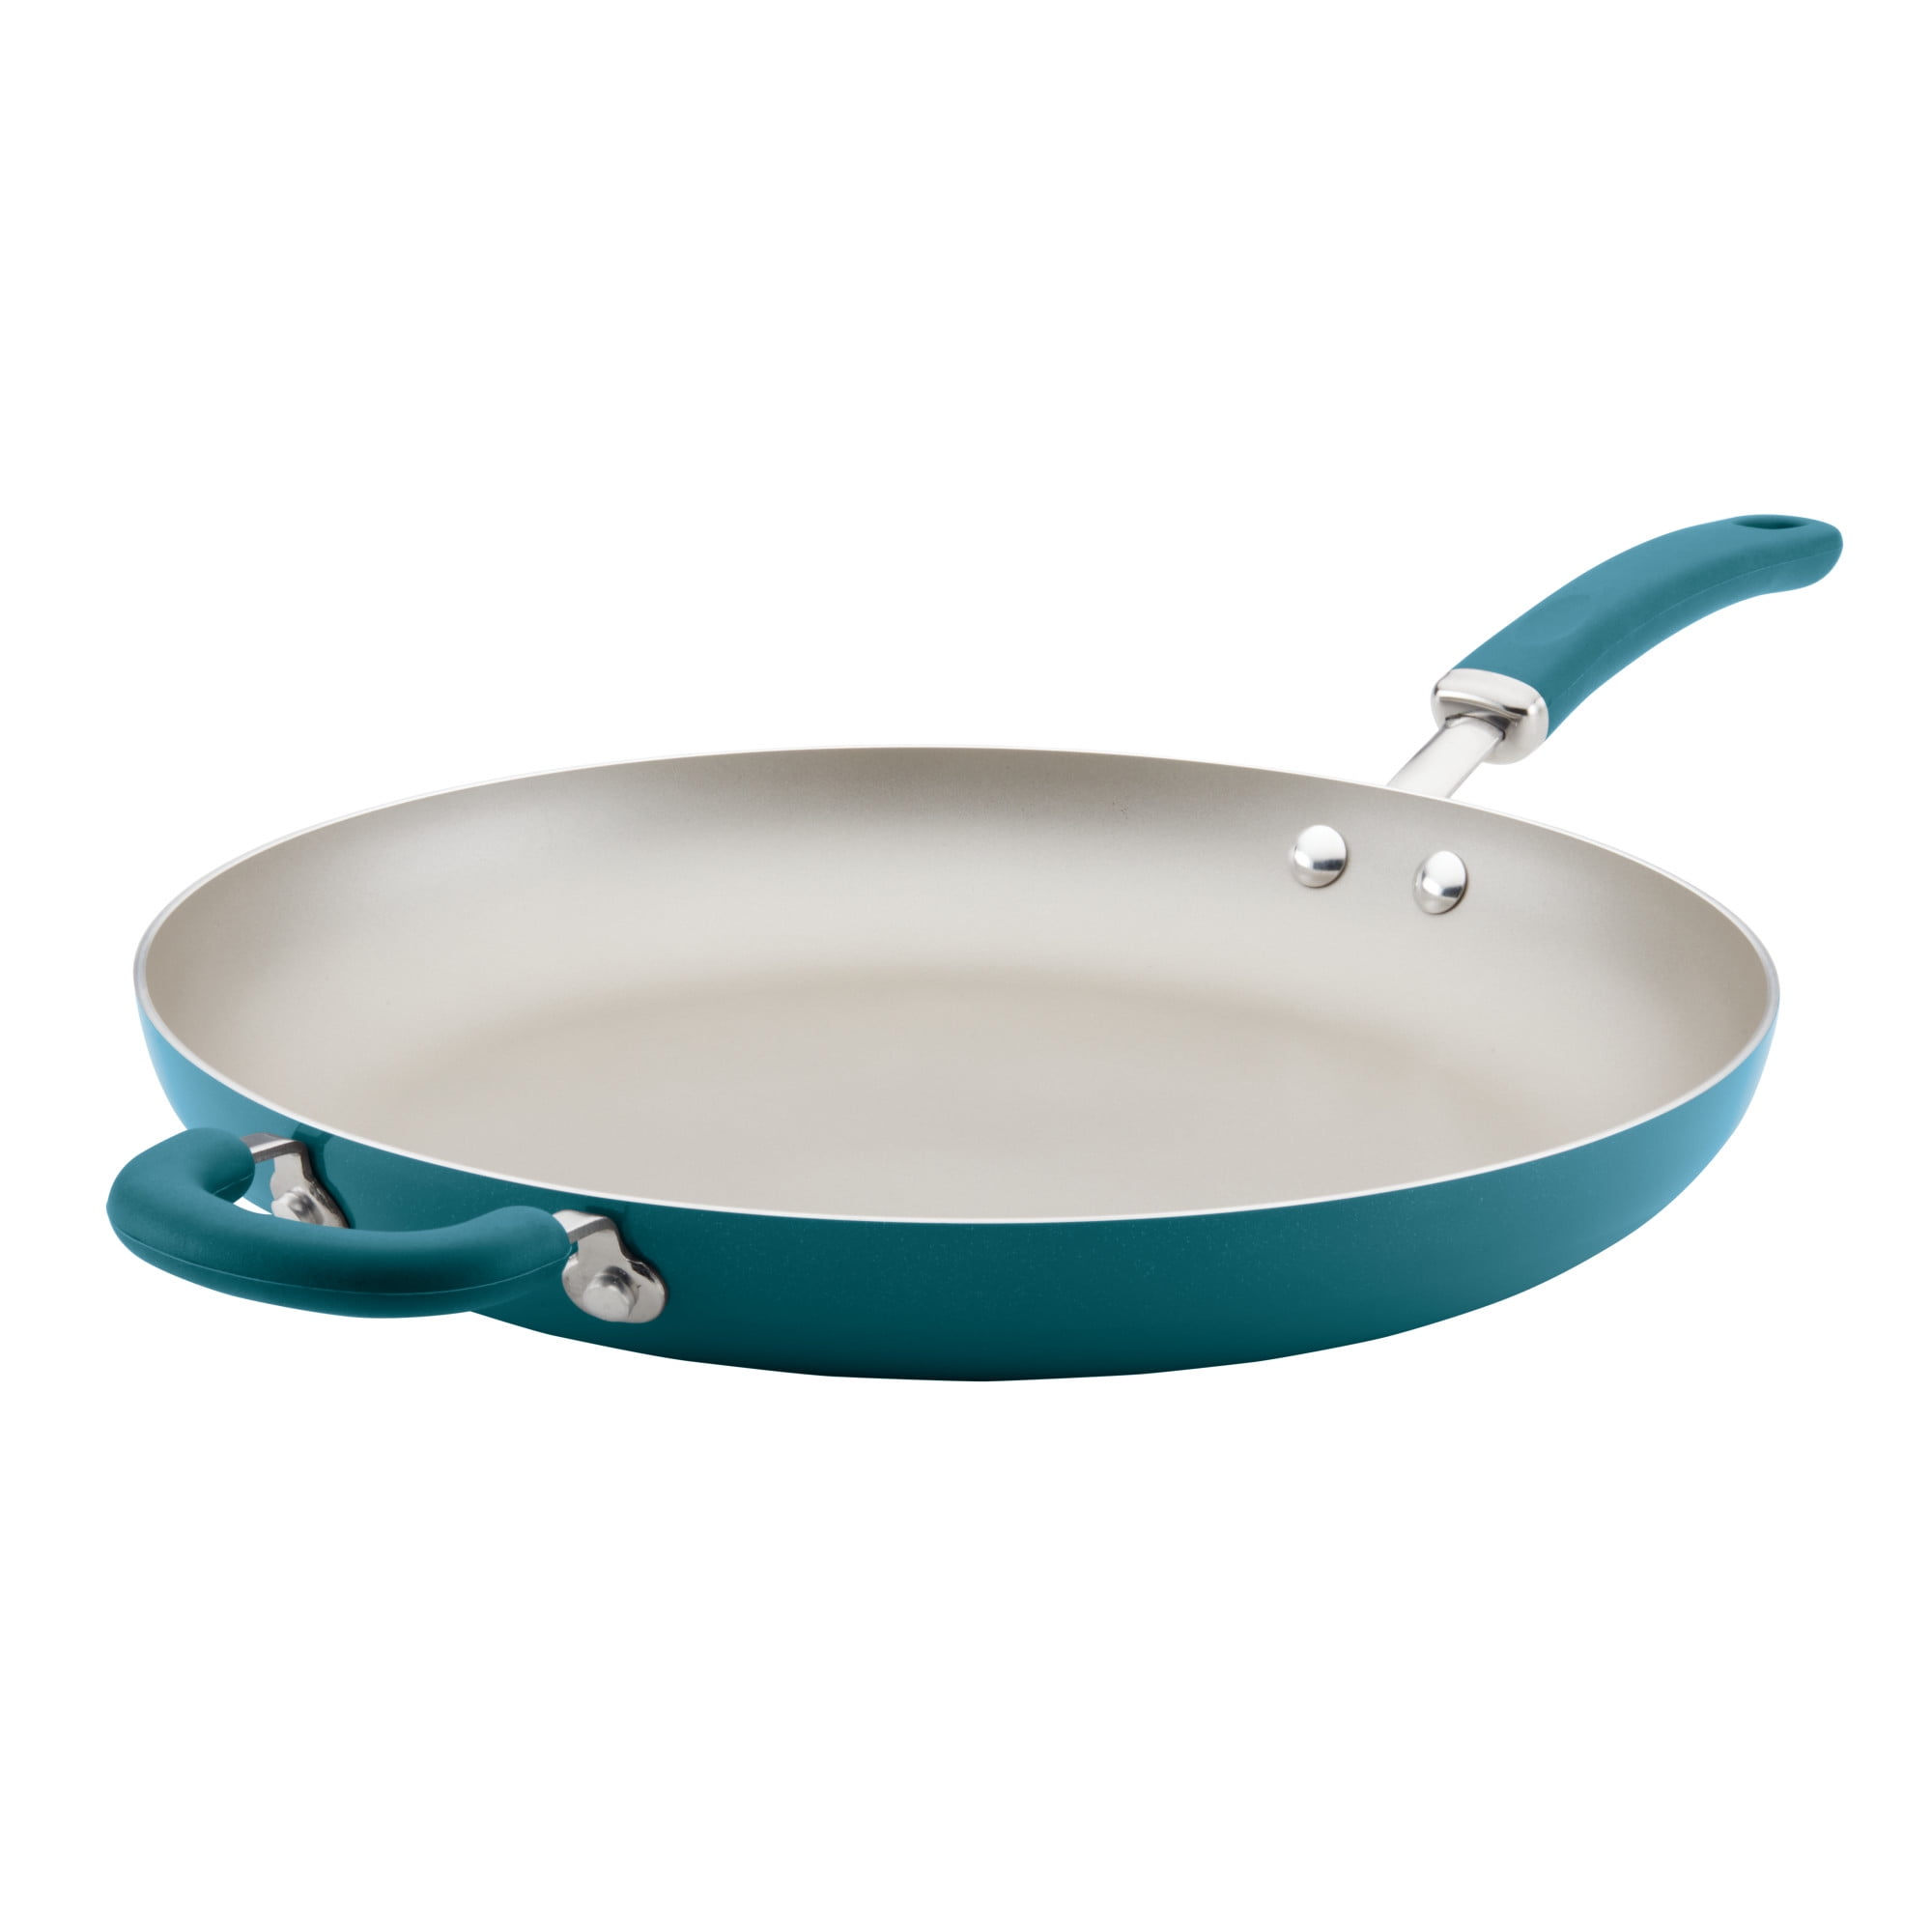 87386 Rachael Ray Hard-Anodized Cookware 8.5-Inch Skillet with Orange Handle 